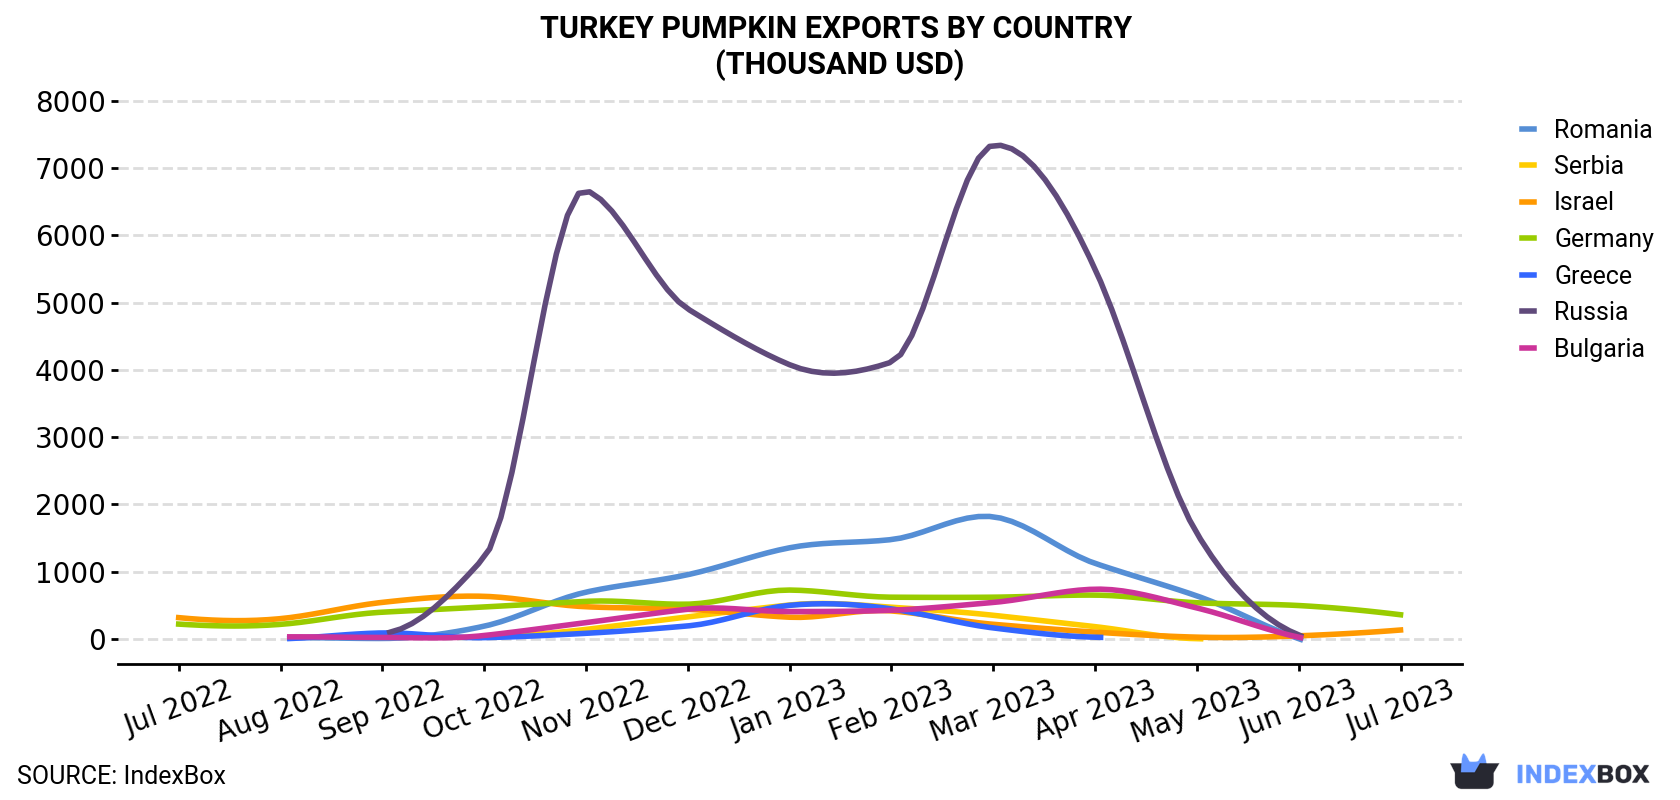 Turkey Pumpkin Exports By Country (Thousand USD)